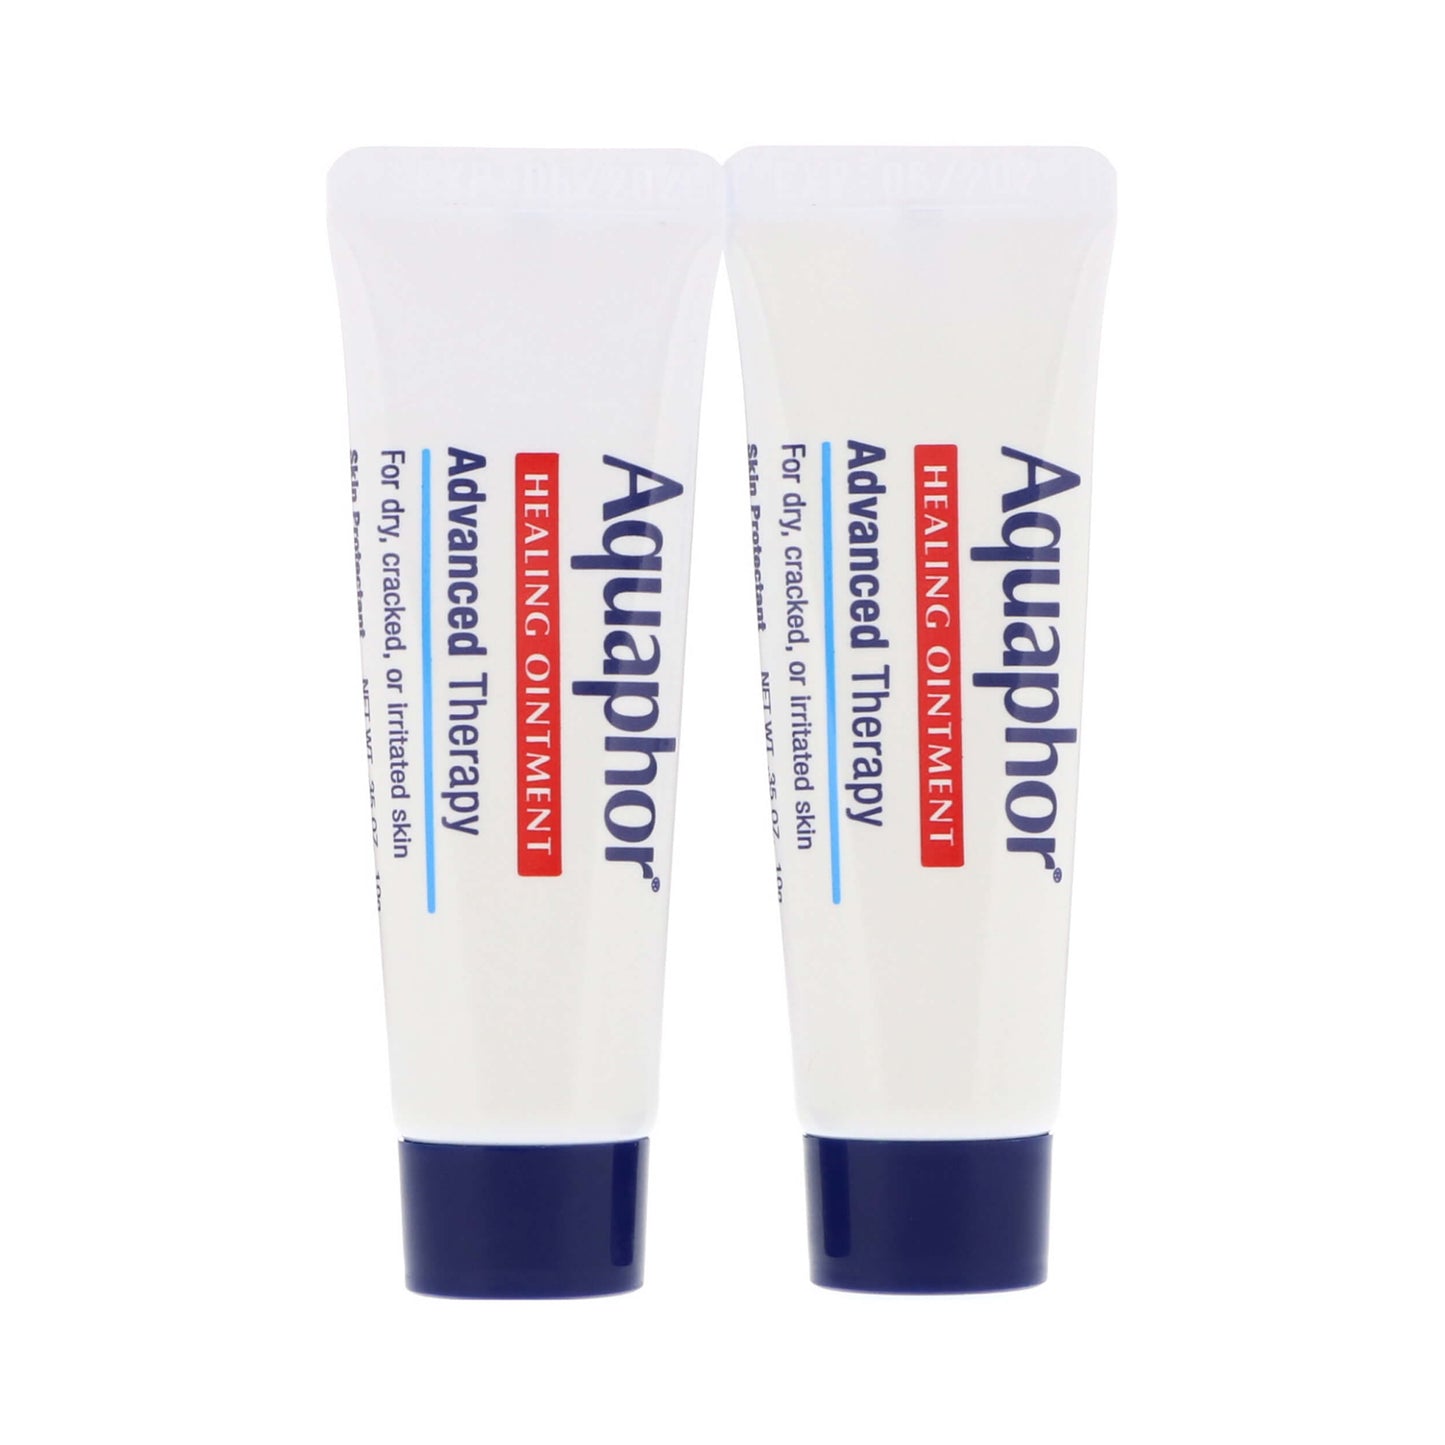 Aquaphor Healing Ointment Skin Protectant 10g Pack of 2Aquaphor Healing Ointment Skin Protectant 10g Pack of 2